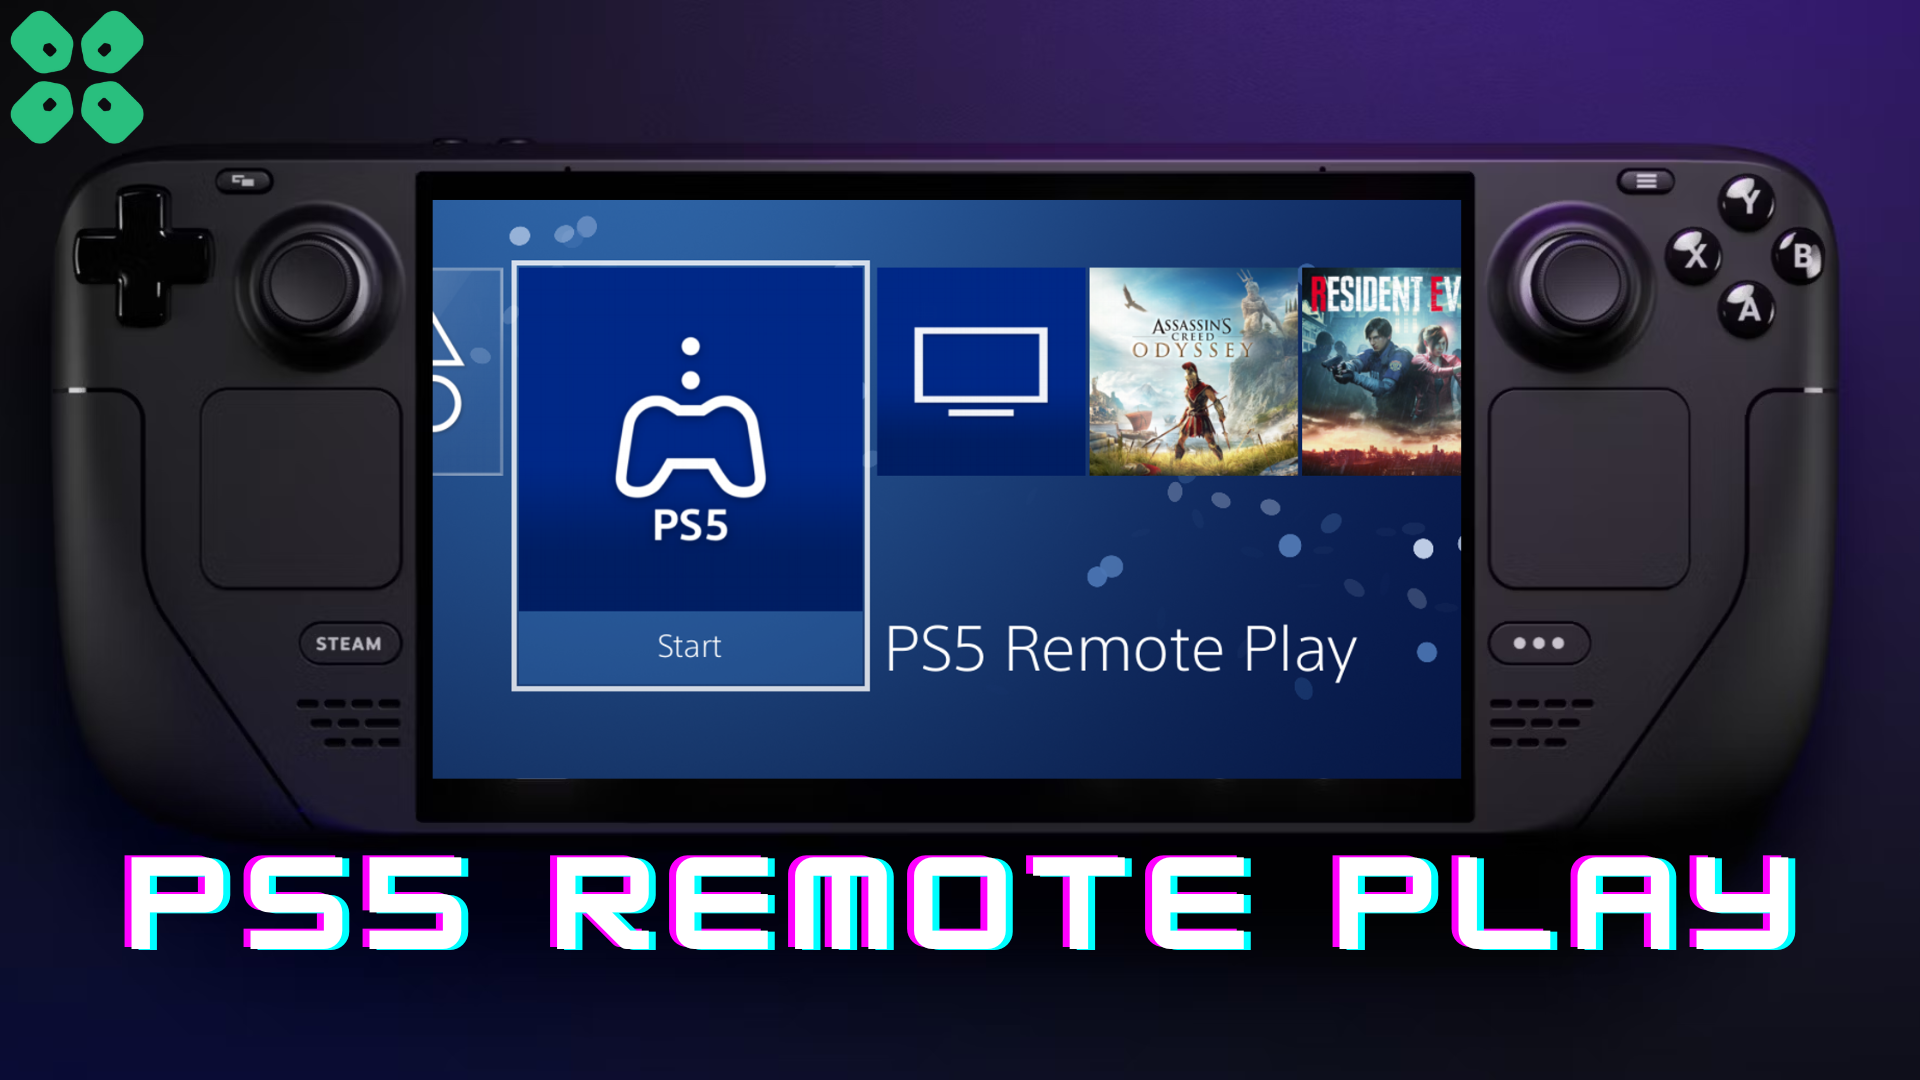 How to Remote Play PS5 on Steam Deck